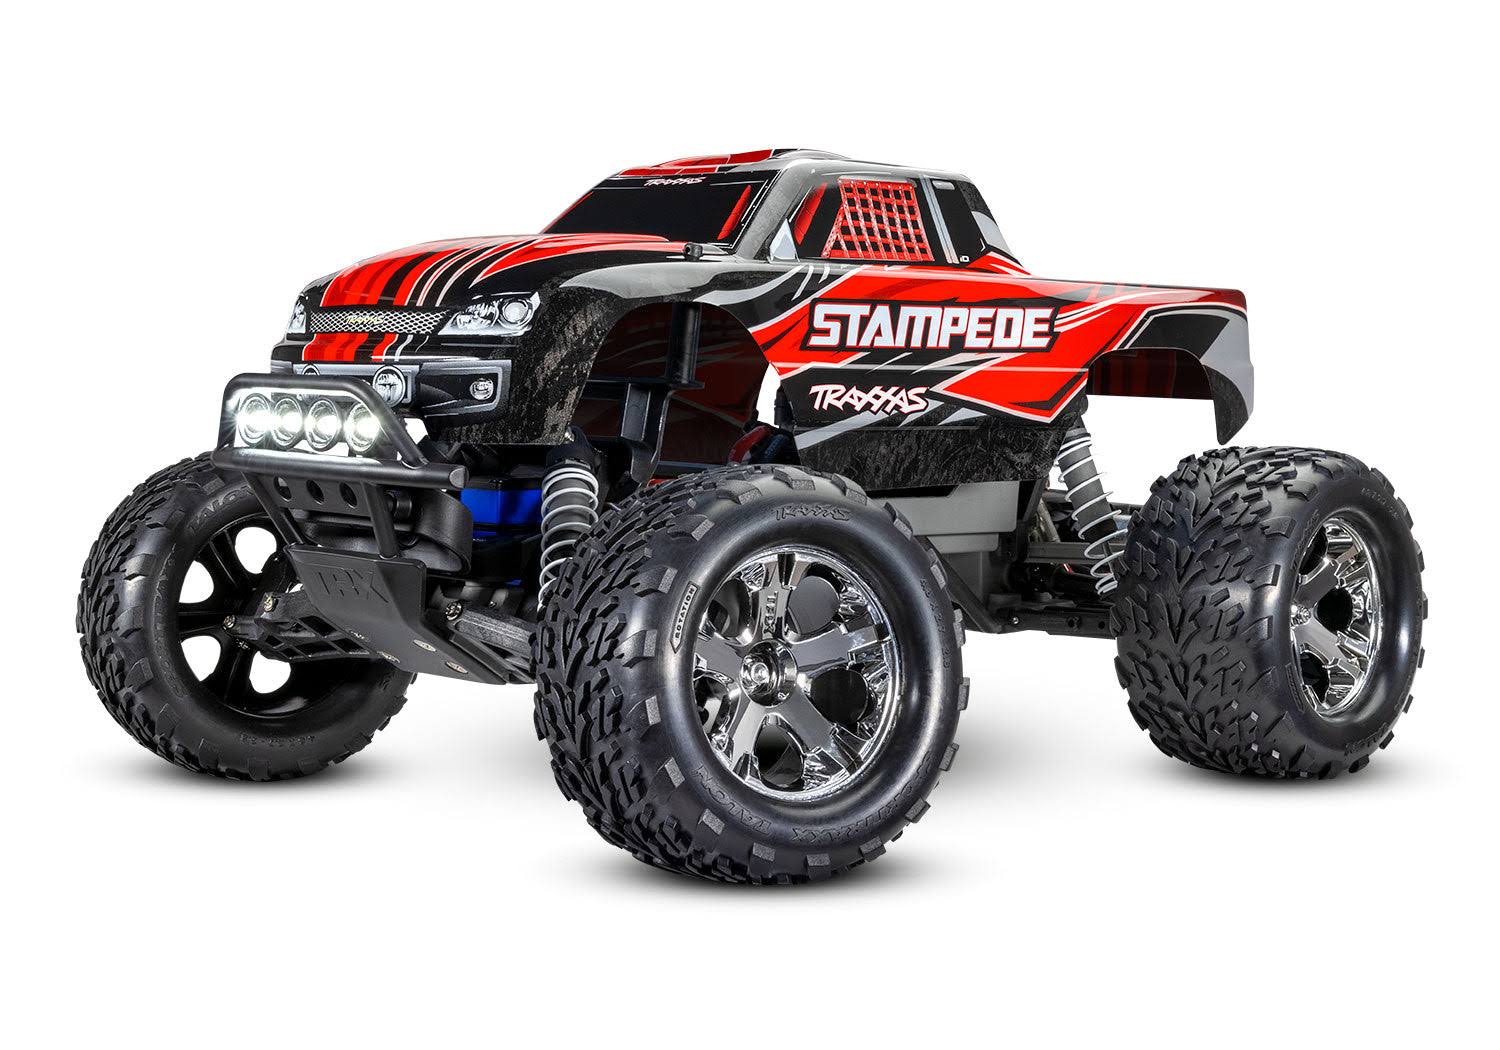 Traxxas Stampede XL-5 2WD Monster Truck - Red with LED TRX36054-61-RED